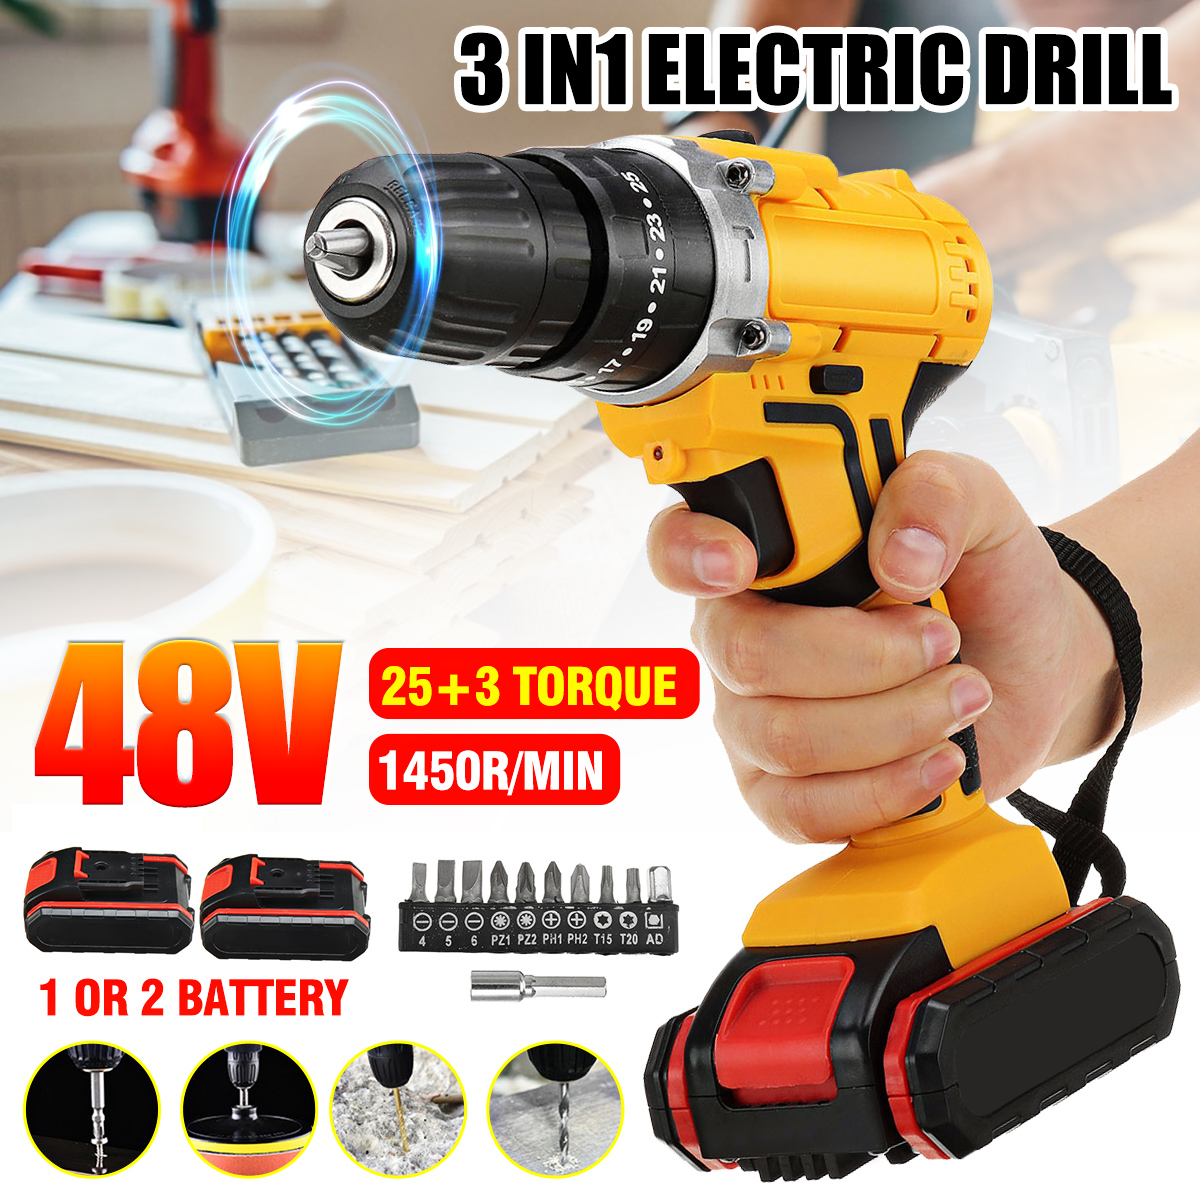 48VF-22800mAh-Cordless-Rechargable-3-In-1-Power-Drills-Impact-Electric-Drill-Driver-With-2Pcs-Batter-1877445-3